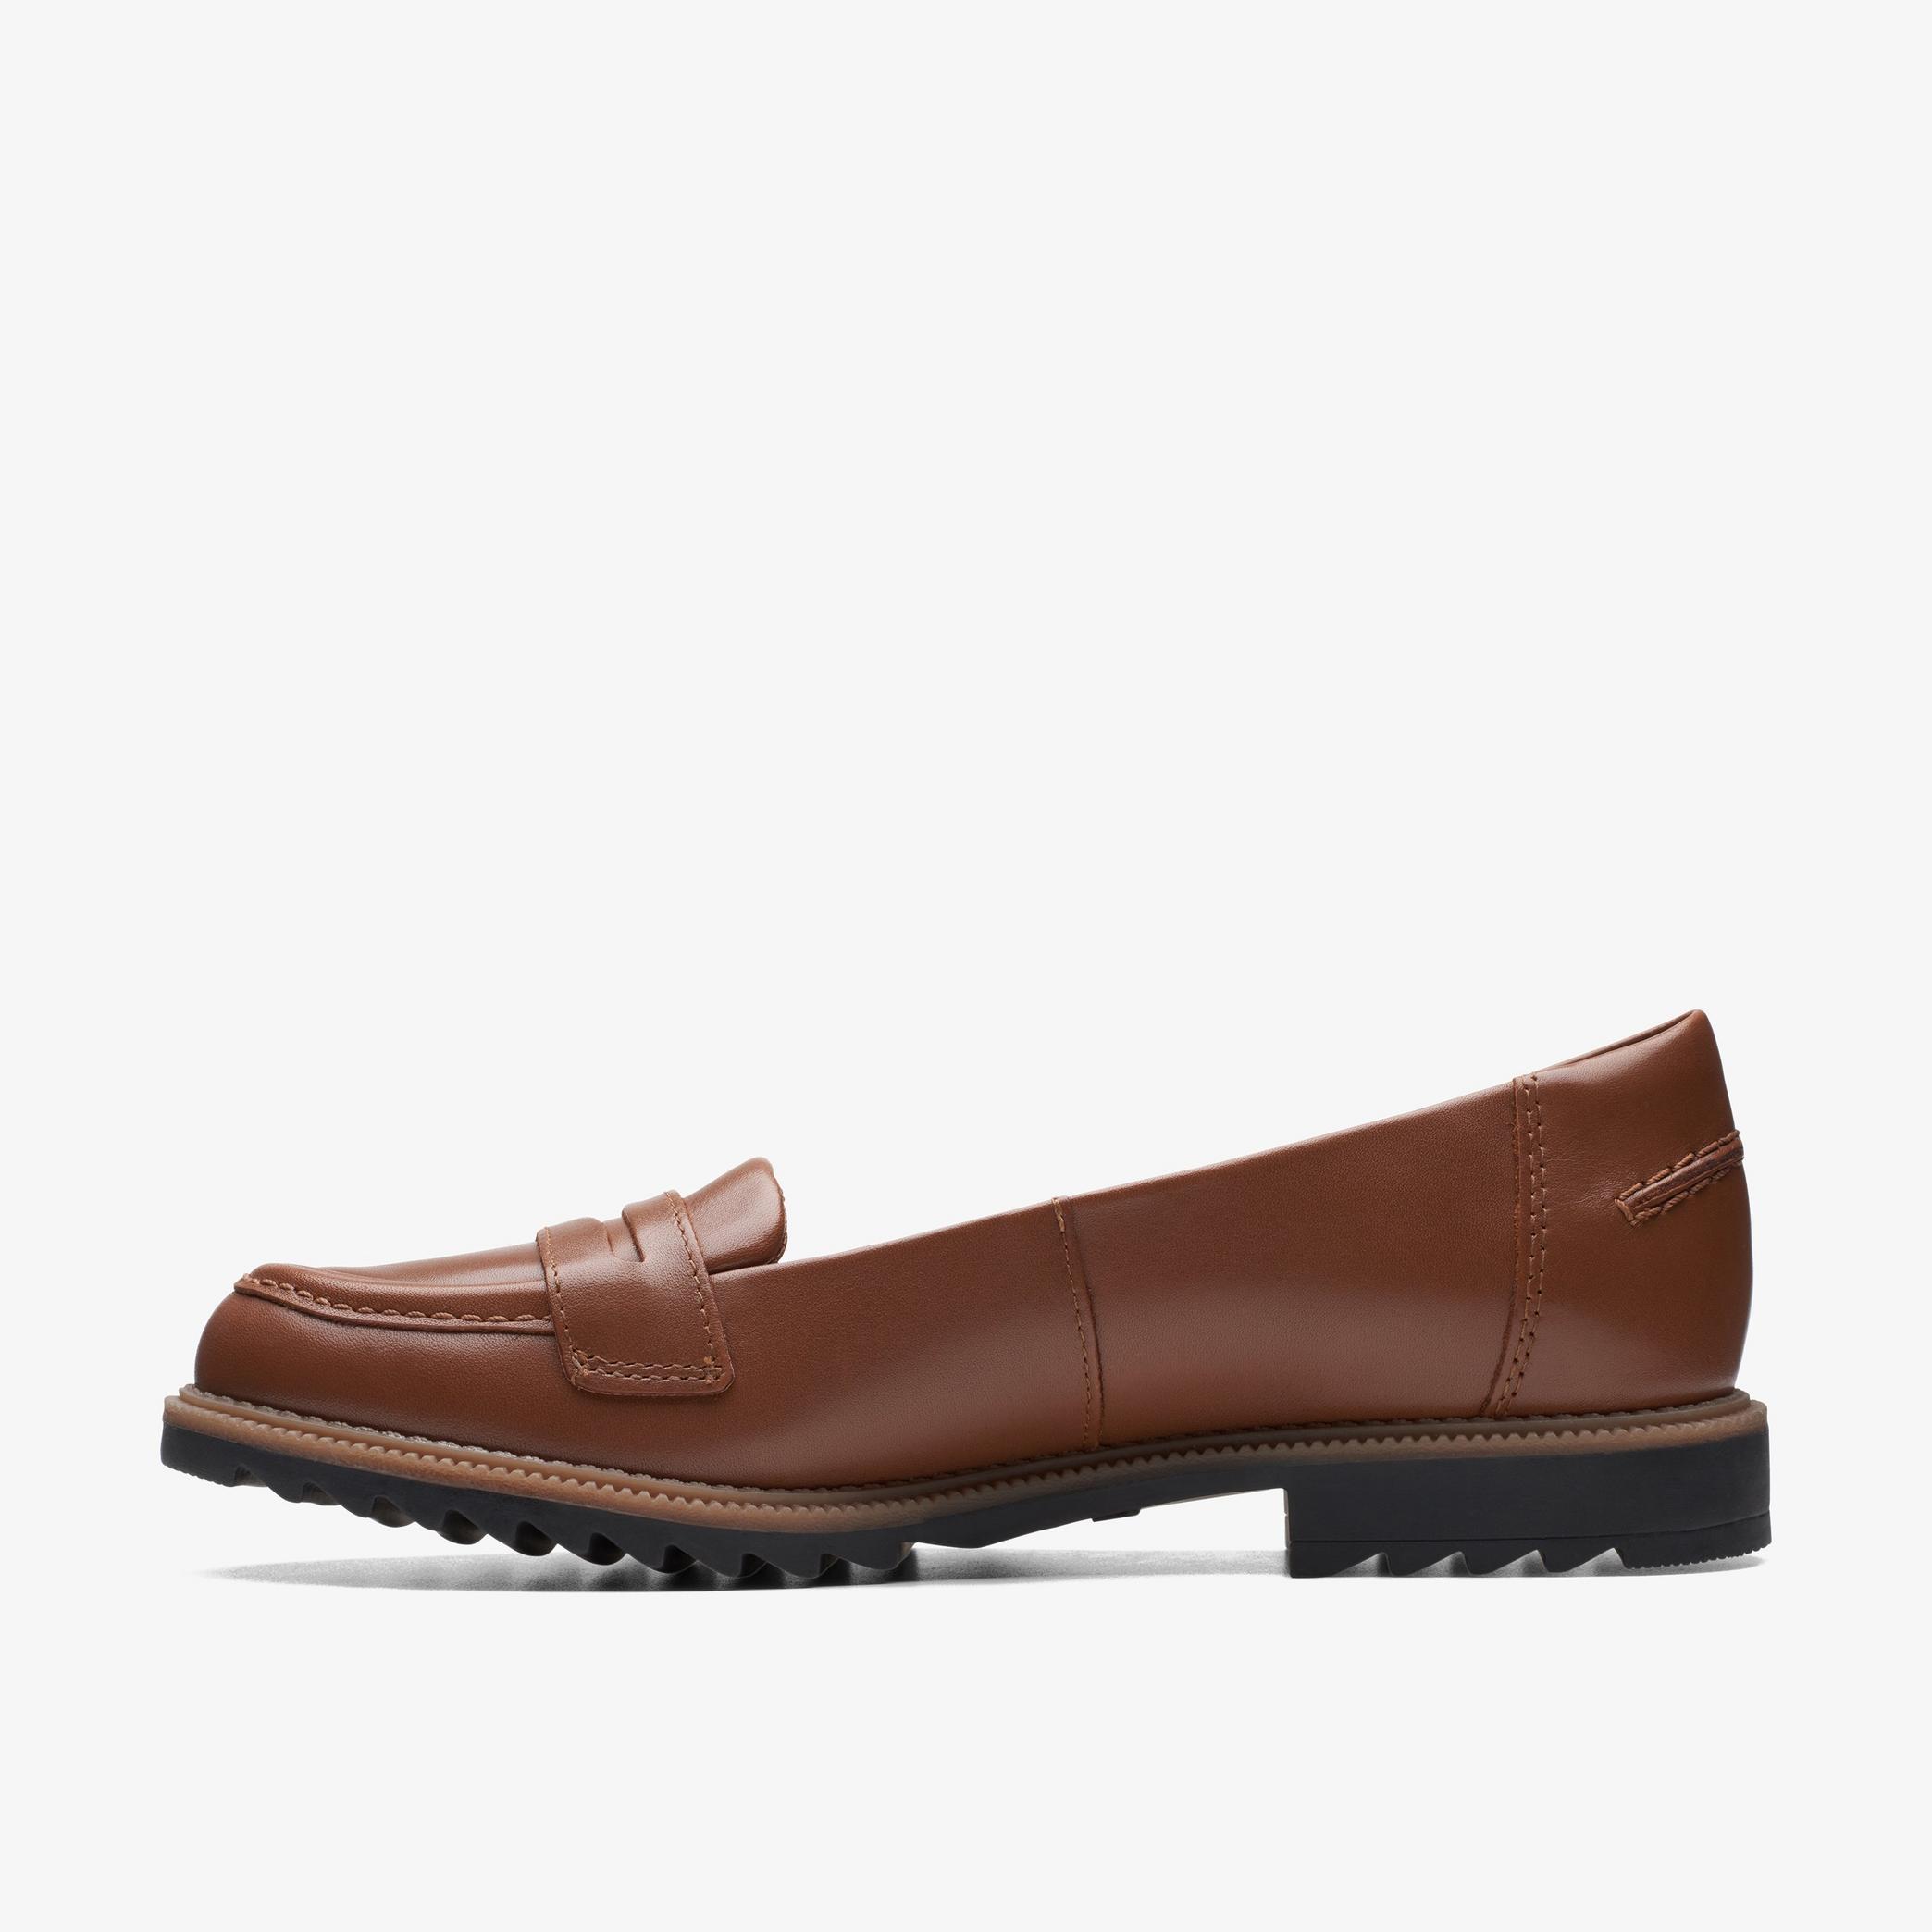 Griffin Milly Tan Leather Loafers, view 2 of 6